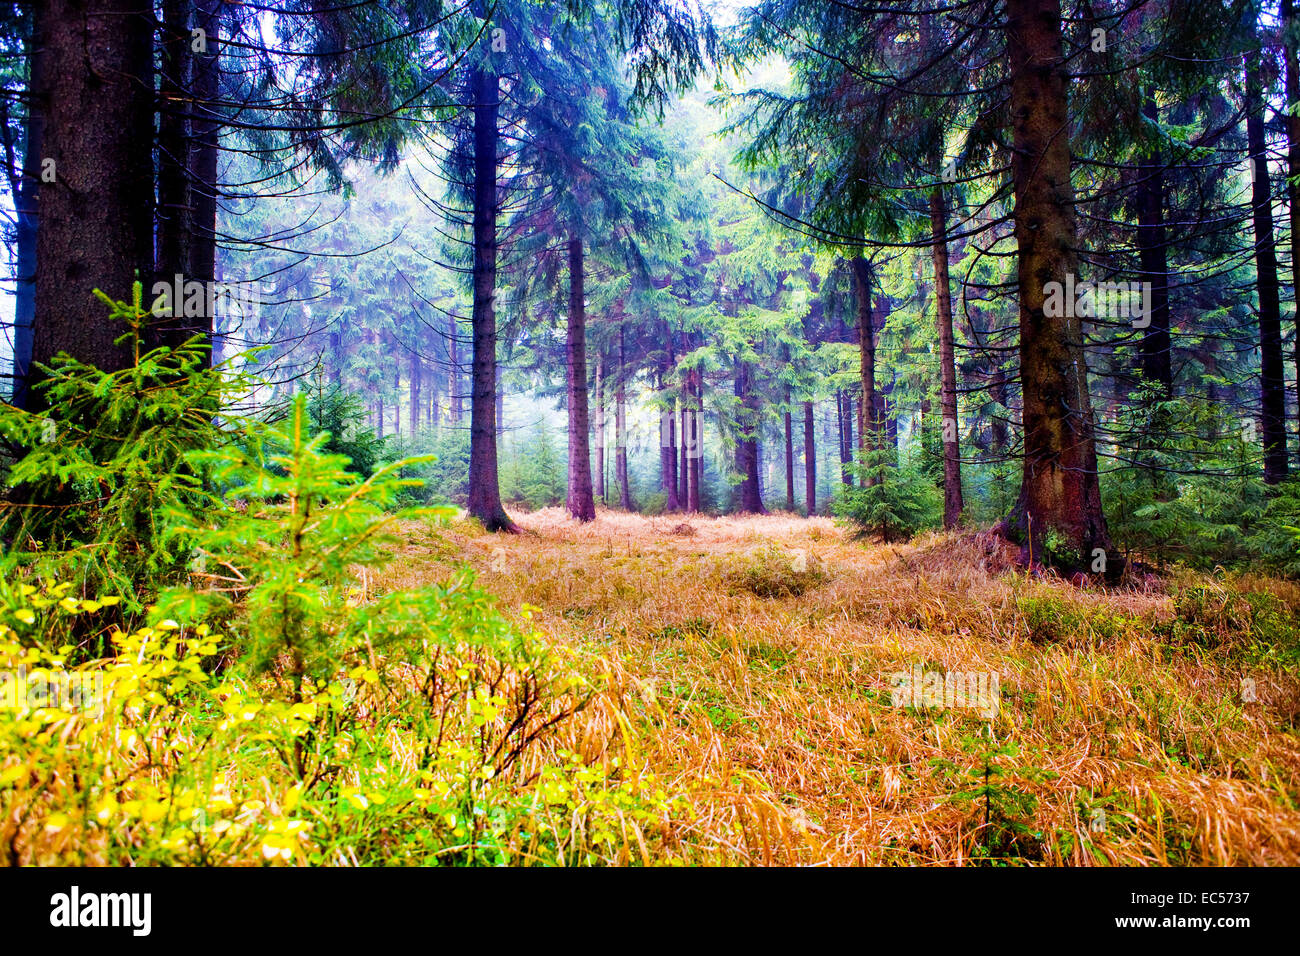 The autumn forest scene A walk in the woods Stock Photo